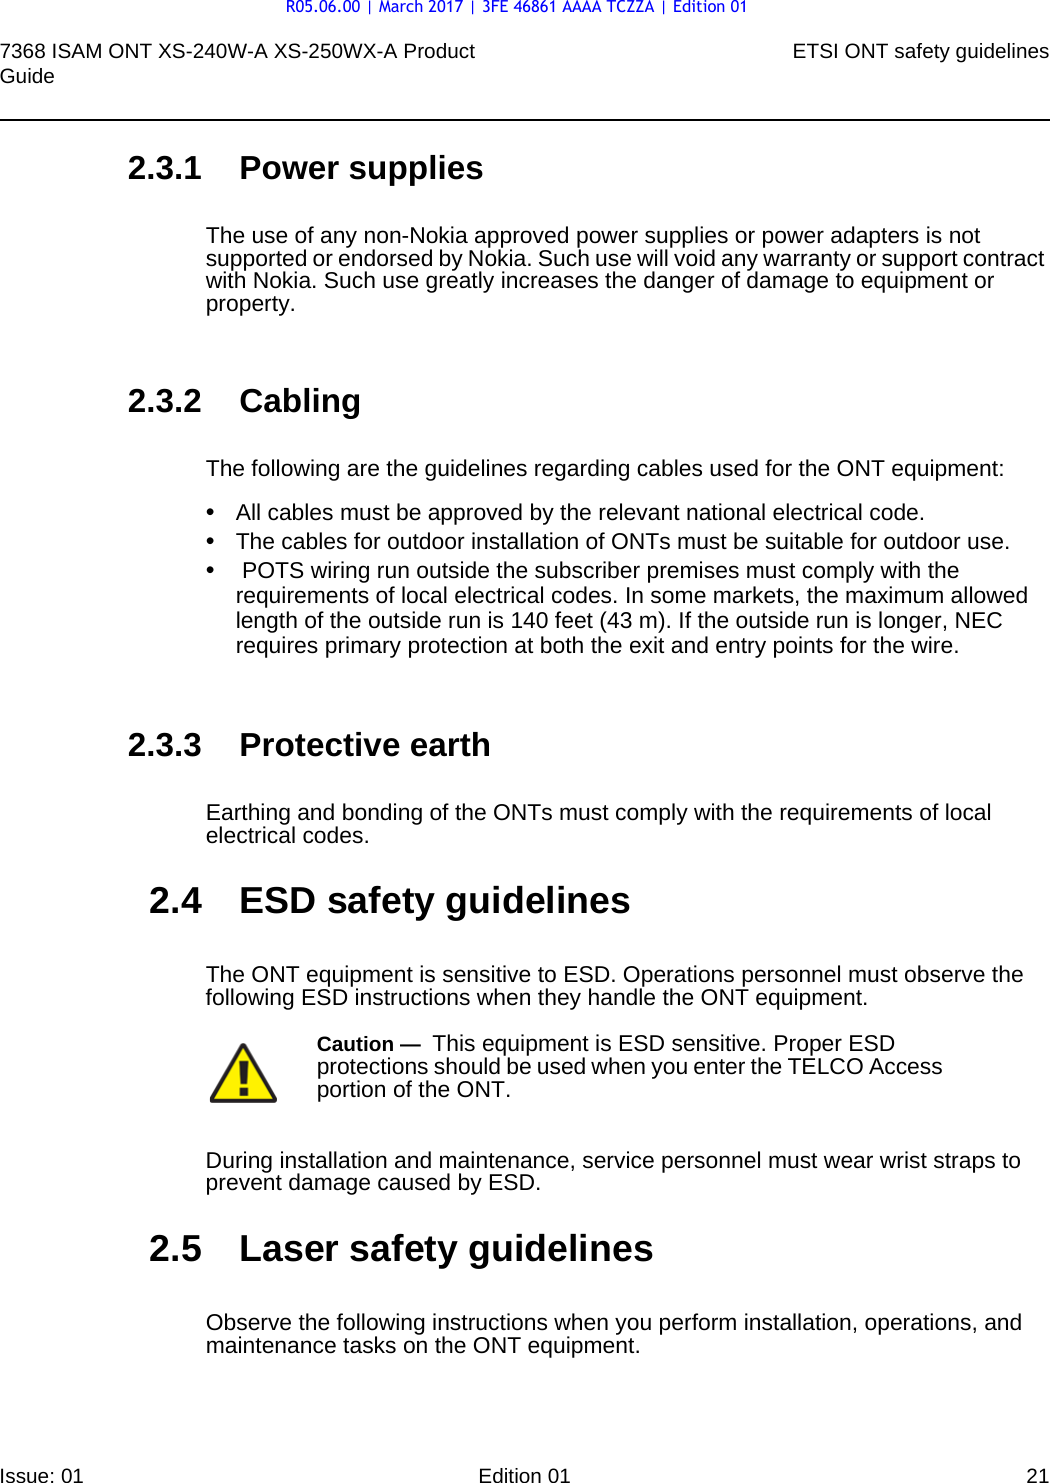 7368 ISAM ONT XS-240W-A XS-250WX-A Product Guide ETSI ONT safety guidelinesIssue: 01 Edition 01 21 2.3.1 Power suppliesThe use of any non-Nokia approved power supplies or power adapters is not supported or endorsed by Nokia. Such use will void any warranty or support contract with Nokia. Such use greatly increases the danger of damage to equipment or property.2.3.2 CablingThe following are the guidelines regarding cables used for the ONT equipment:•All cables must be approved by the relevant national electrical code.•The cables for outdoor installation of ONTs must be suitable for outdoor use.• POTS wiring run outside the subscriber premises must comply with the requirements of local electrical codes. In some markets, the maximum allowed length of the outside run is 140 feet (43 m). If the outside run is longer, NEC requires primary protection at both the exit and entry points for the wire.2.3.3 Protective earthEarthing and bonding of the ONTs must comply with the requirements of local electrical codes.2.4 ESD safety guidelinesThe ONT equipment is sensitive to ESD. Operations personnel must observe the following ESD instructions when they handle the ONT equipment. During installation and maintenance, service personnel must wear wrist straps to prevent damage caused by ESD.2.5 Laser safety guidelinesObserve the following instructions when you perform installation, operations, and maintenance tasks on the ONT equipment.Caution —  This equipment is ESD sensitive. Proper ESD protections should be used when you enter the TELCO Access portion of the ONT.R05.06.00 | March 2017 | 3FE 46861 AAAA TCZZA | Edition 01